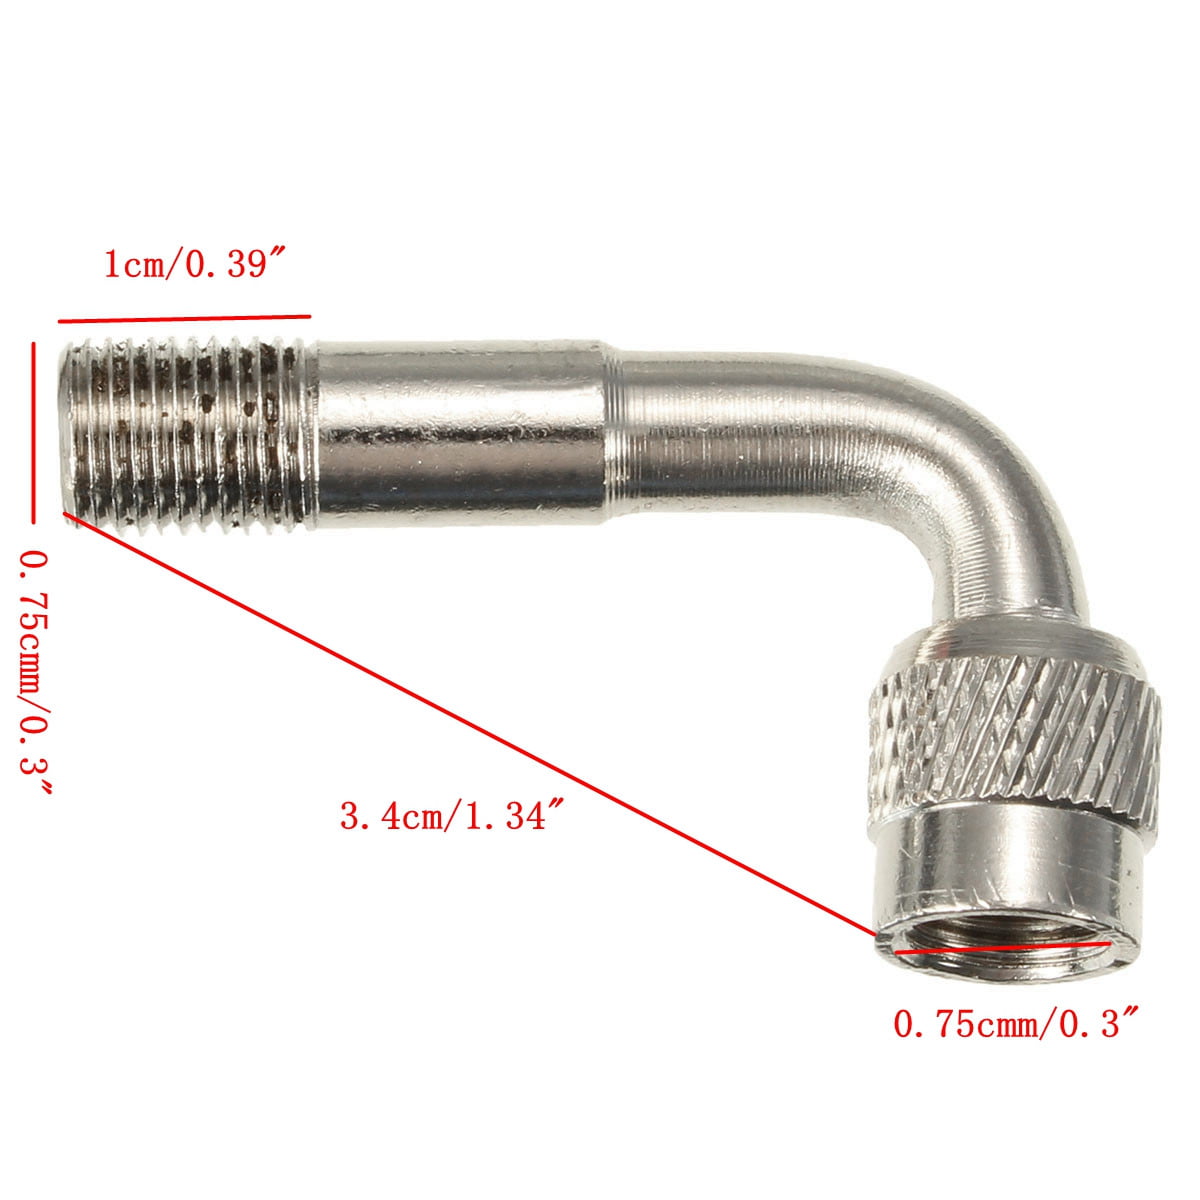 90 Degree Angle Air Tyre Valve Extension Adaptor for Motorcycle Car Bike Scooter 